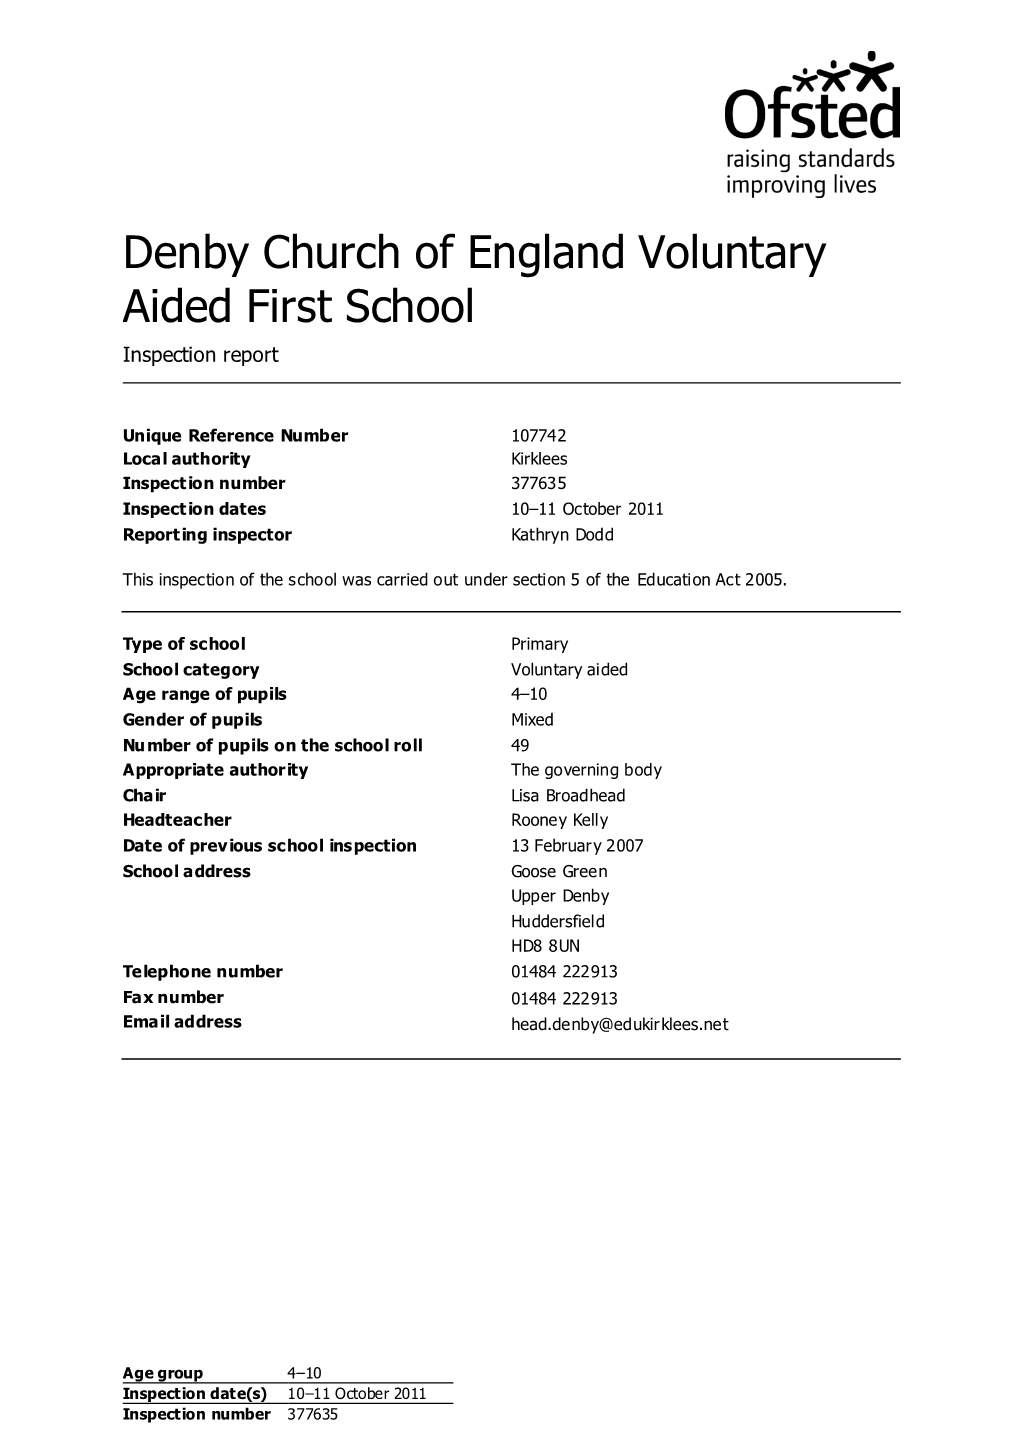 Denby Church of England Voluntary Aided First School Inspection Report